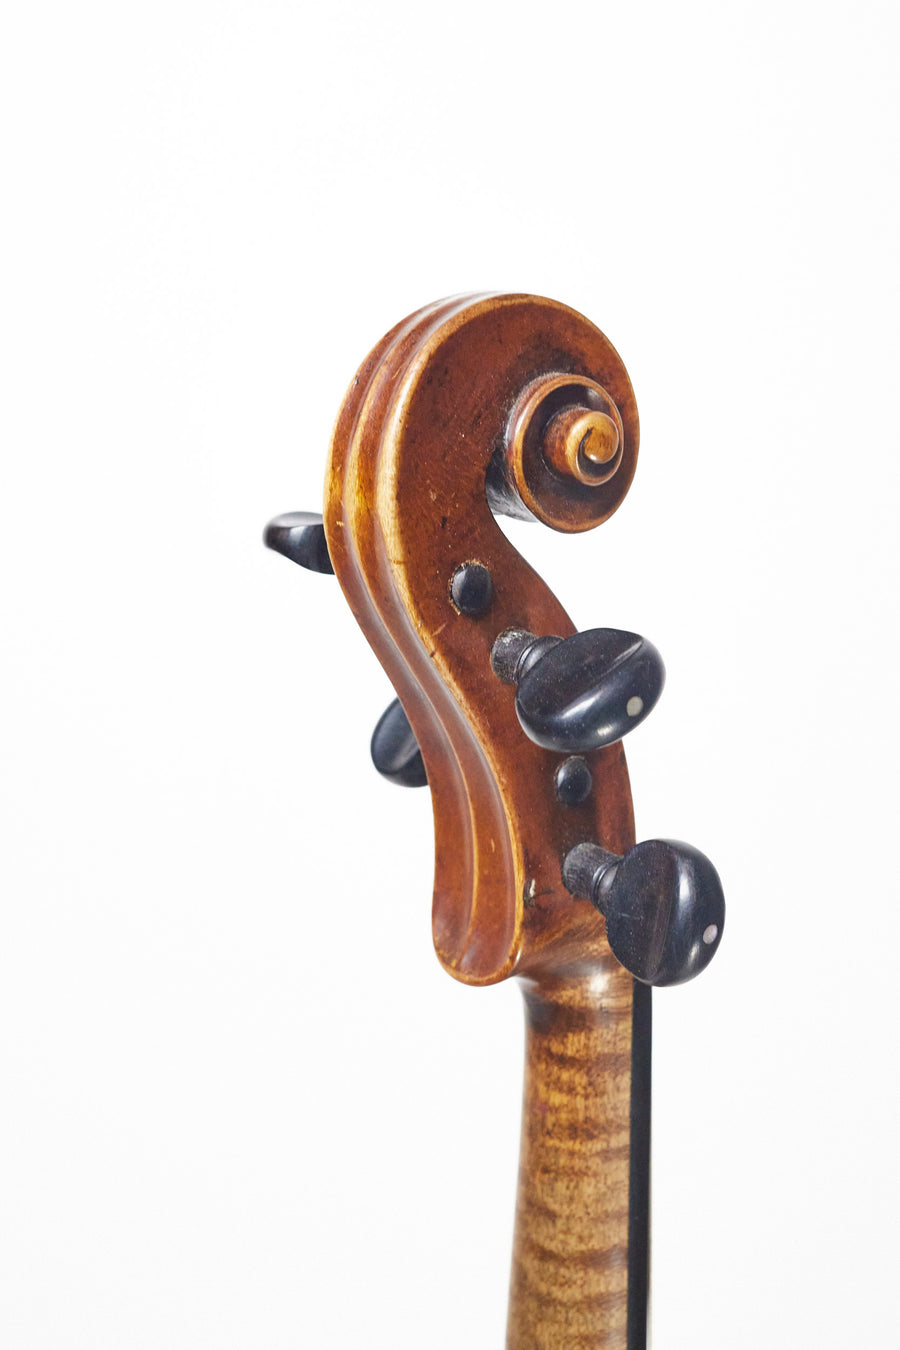 An Early 19th Century German Violin By Friedrich August Glass.